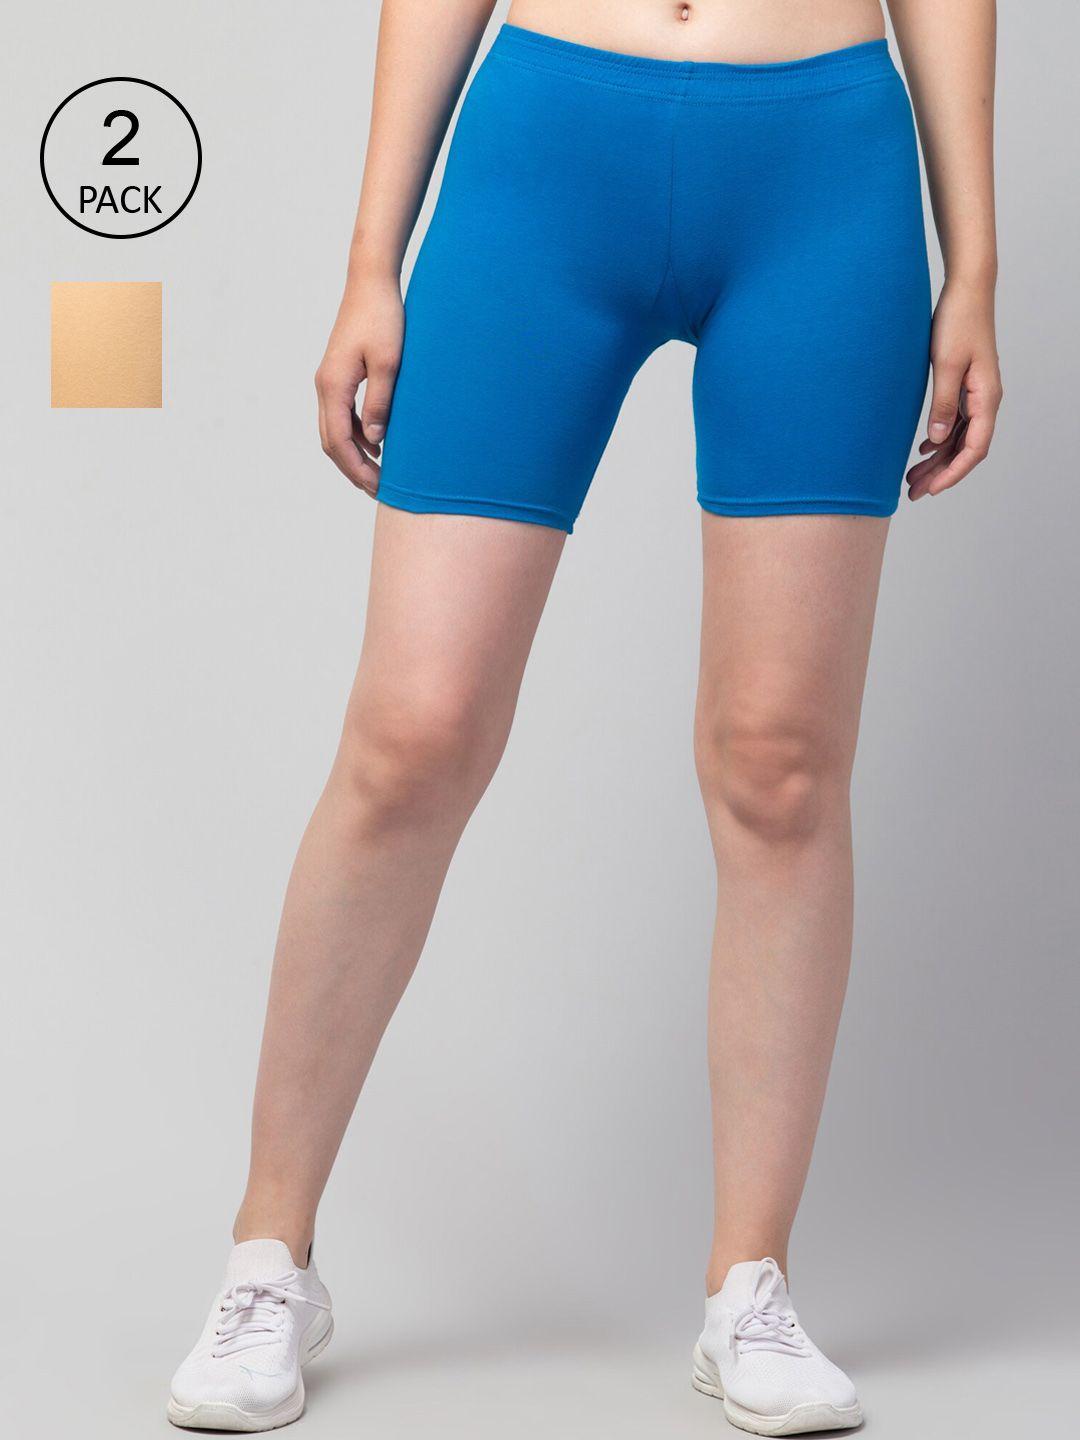 apraa-&-parma-women-pack-of-2-skinny-fit-cycling-cotton-sports-shorts